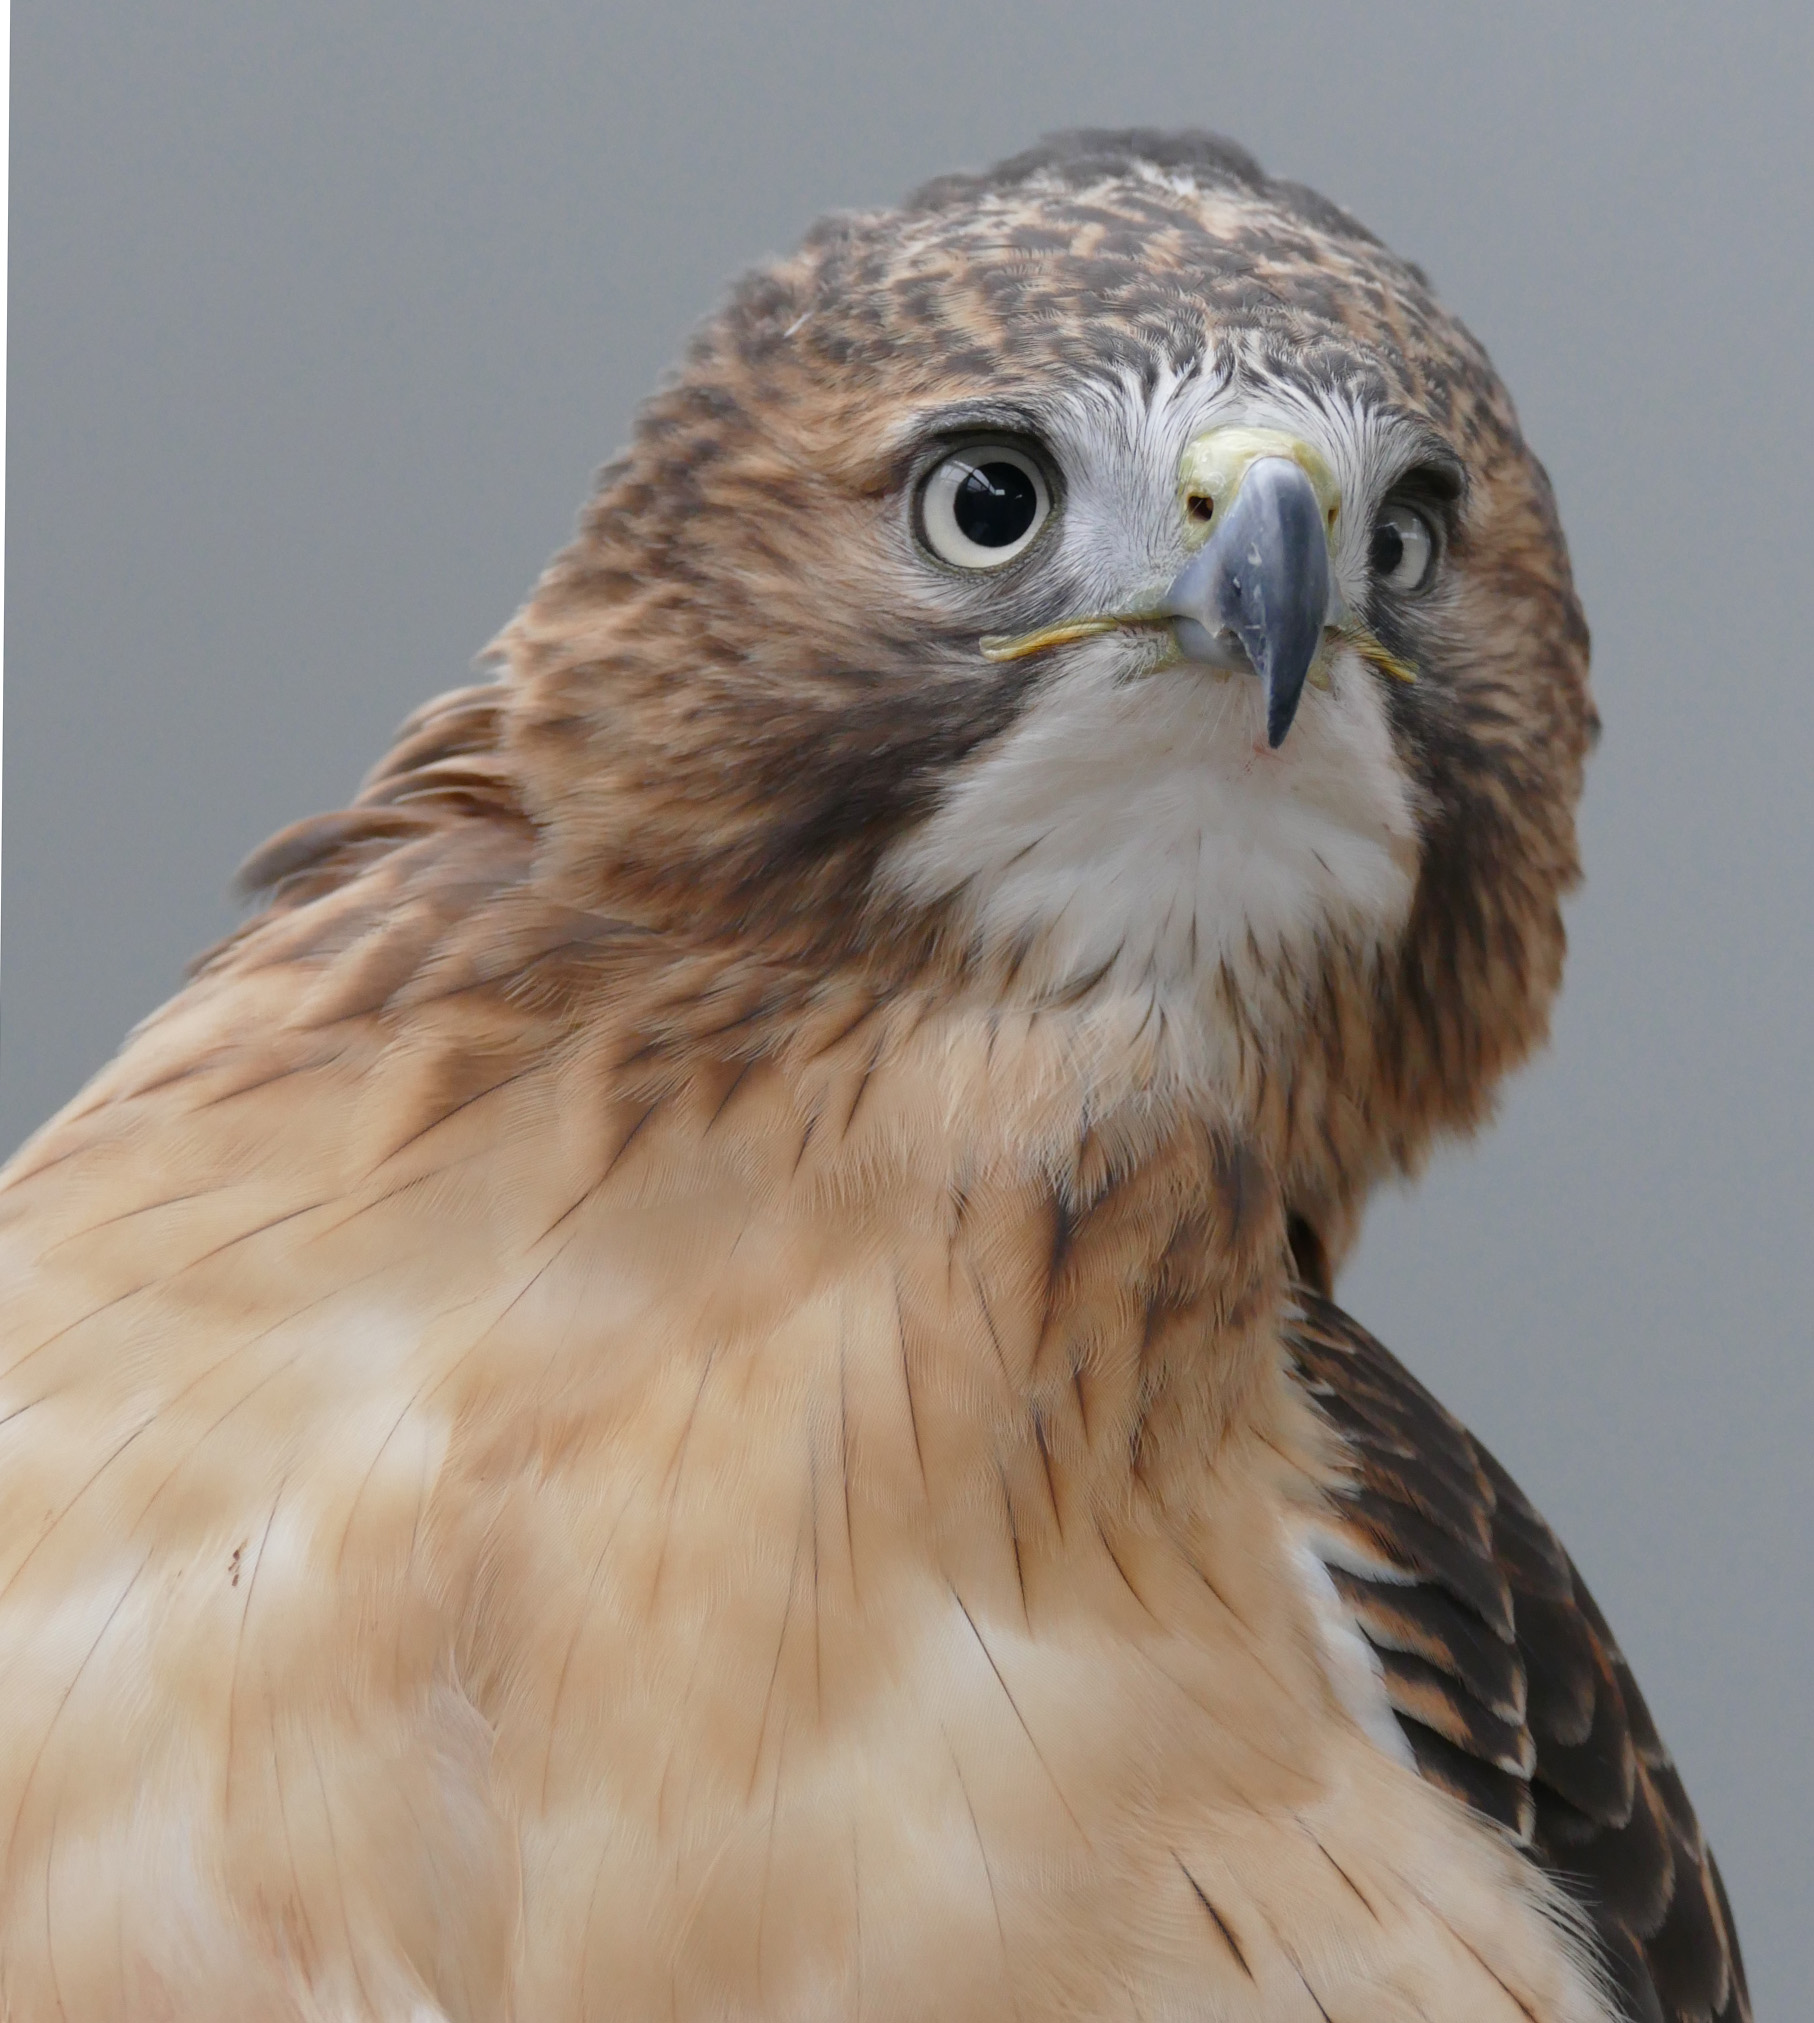 Luta, a red-tailed hawk